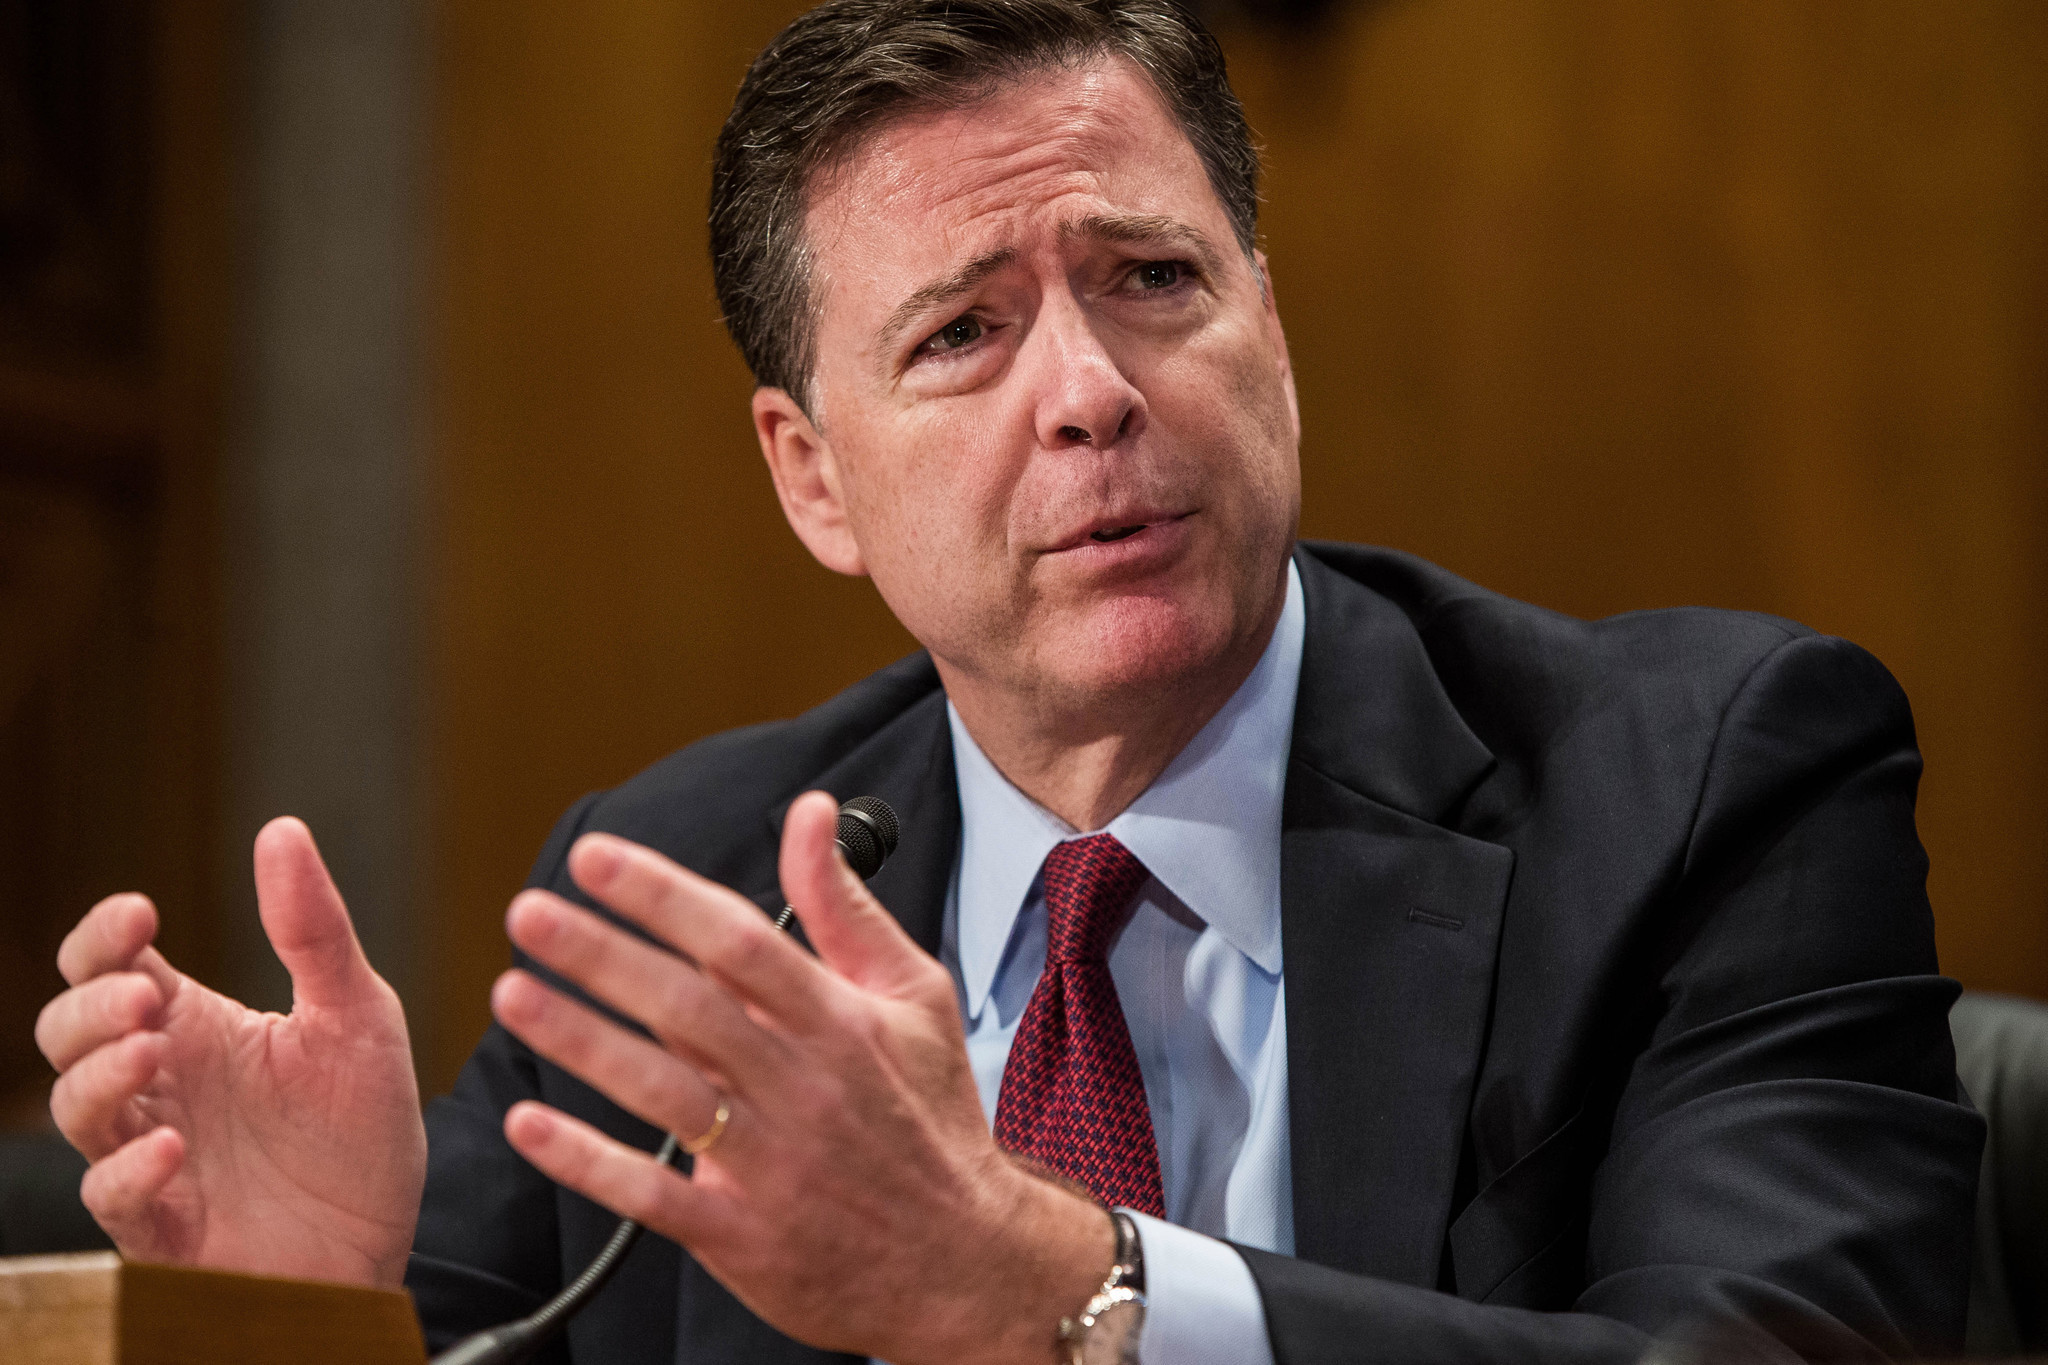 James Comey should be fired - Chicago Tribune